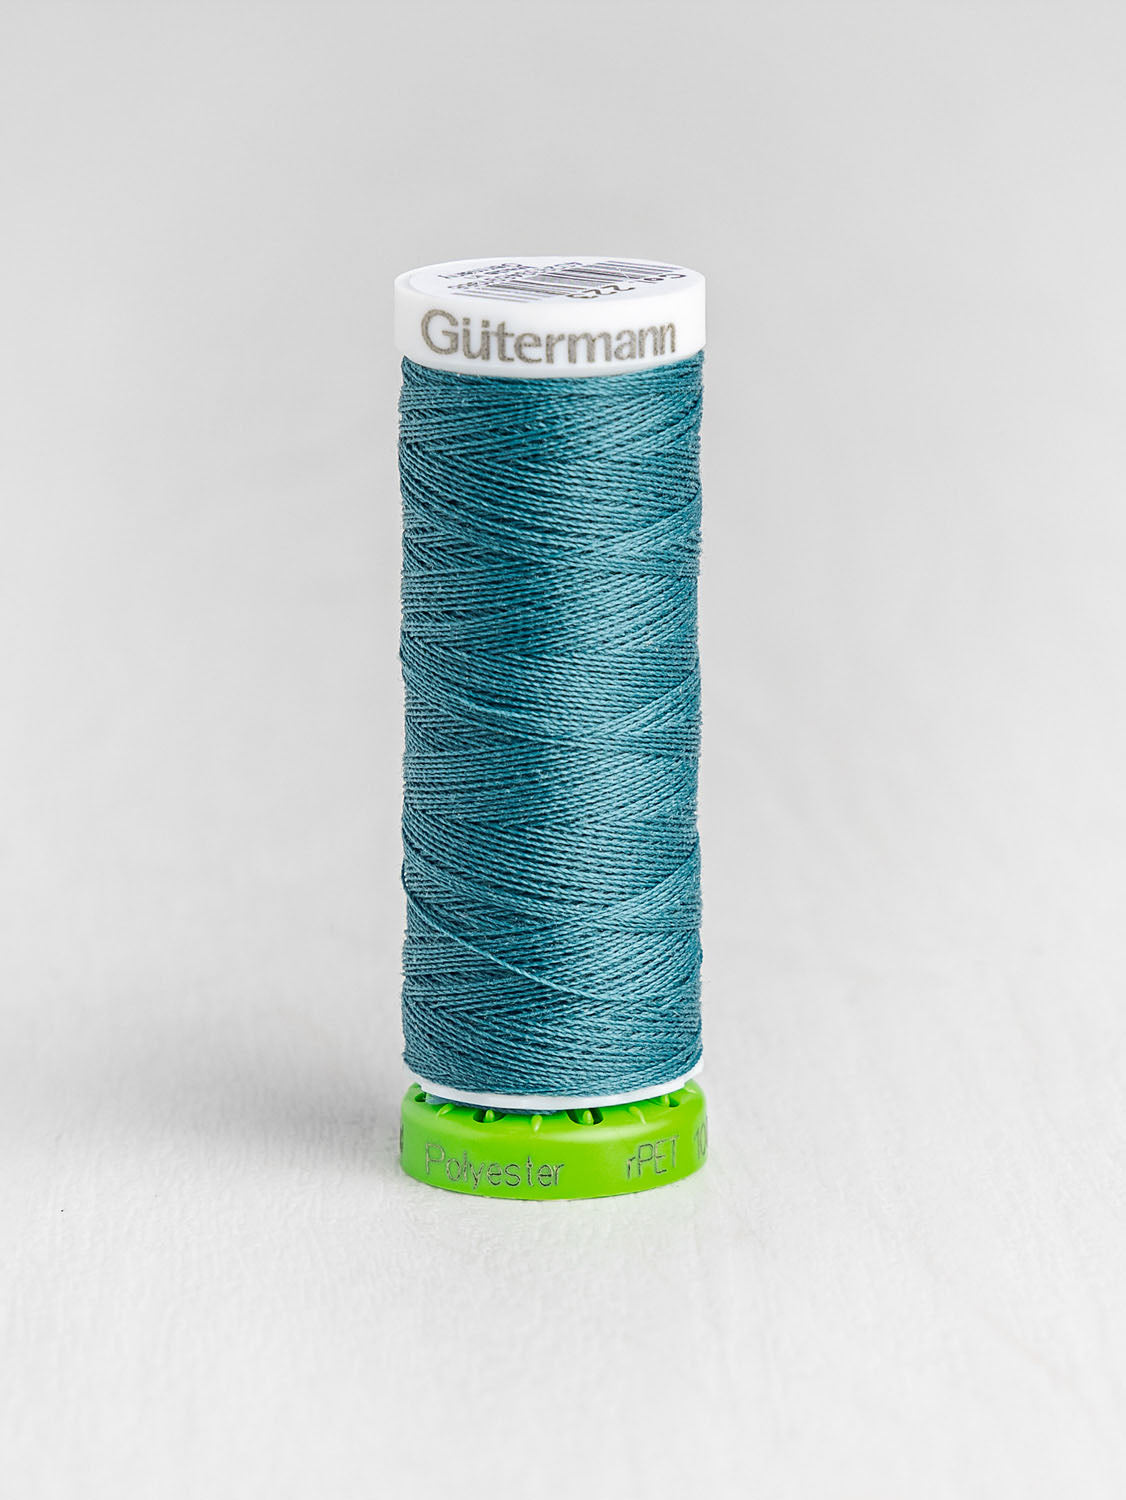 Gütermann All Purpose rPET Recycled Thread - Teal 223 | Core Fabrics